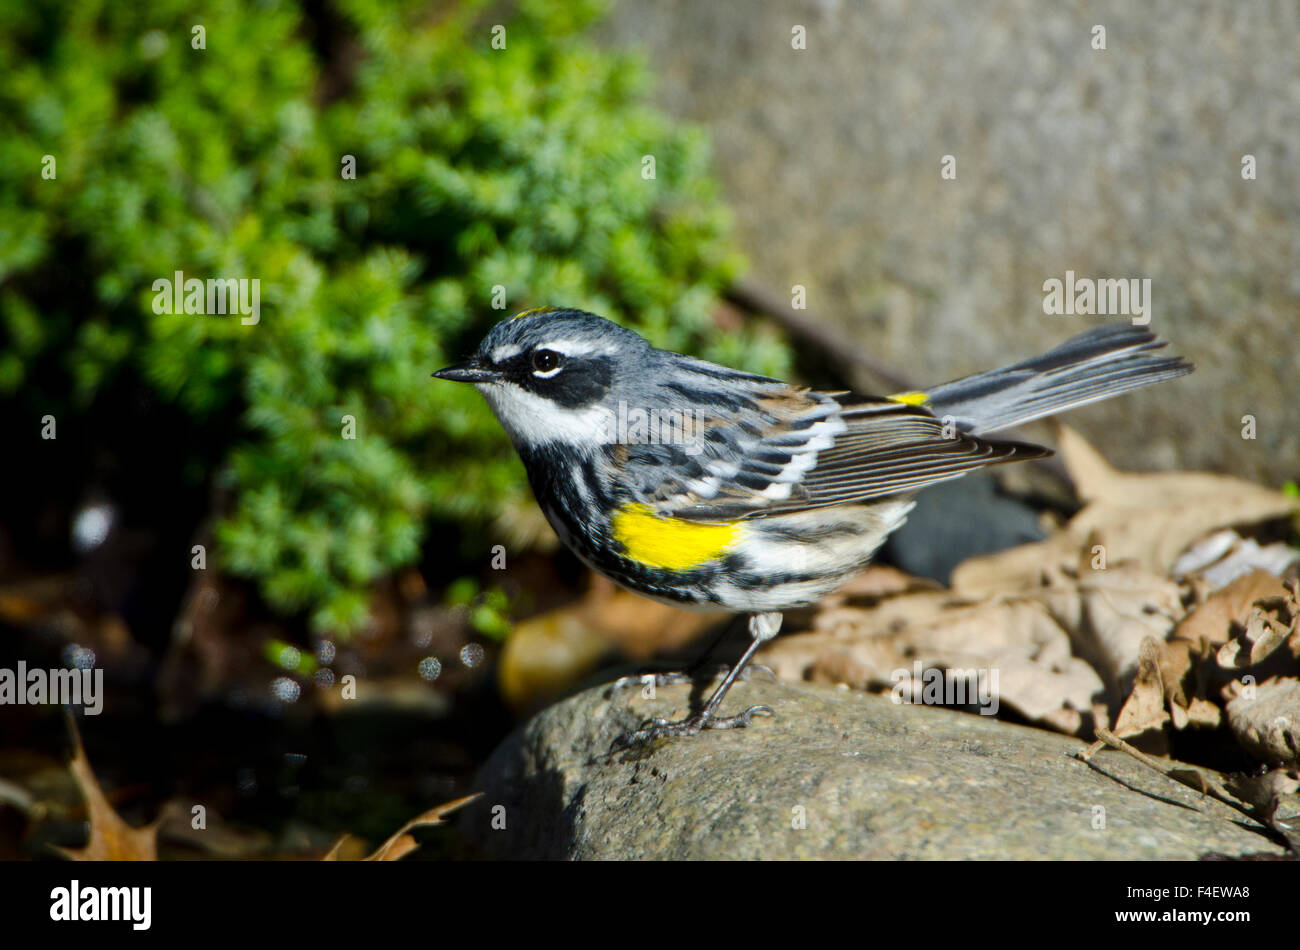 Minnesota, Mendota Heights, Cape May Warbler perched on a branch Stock Photo